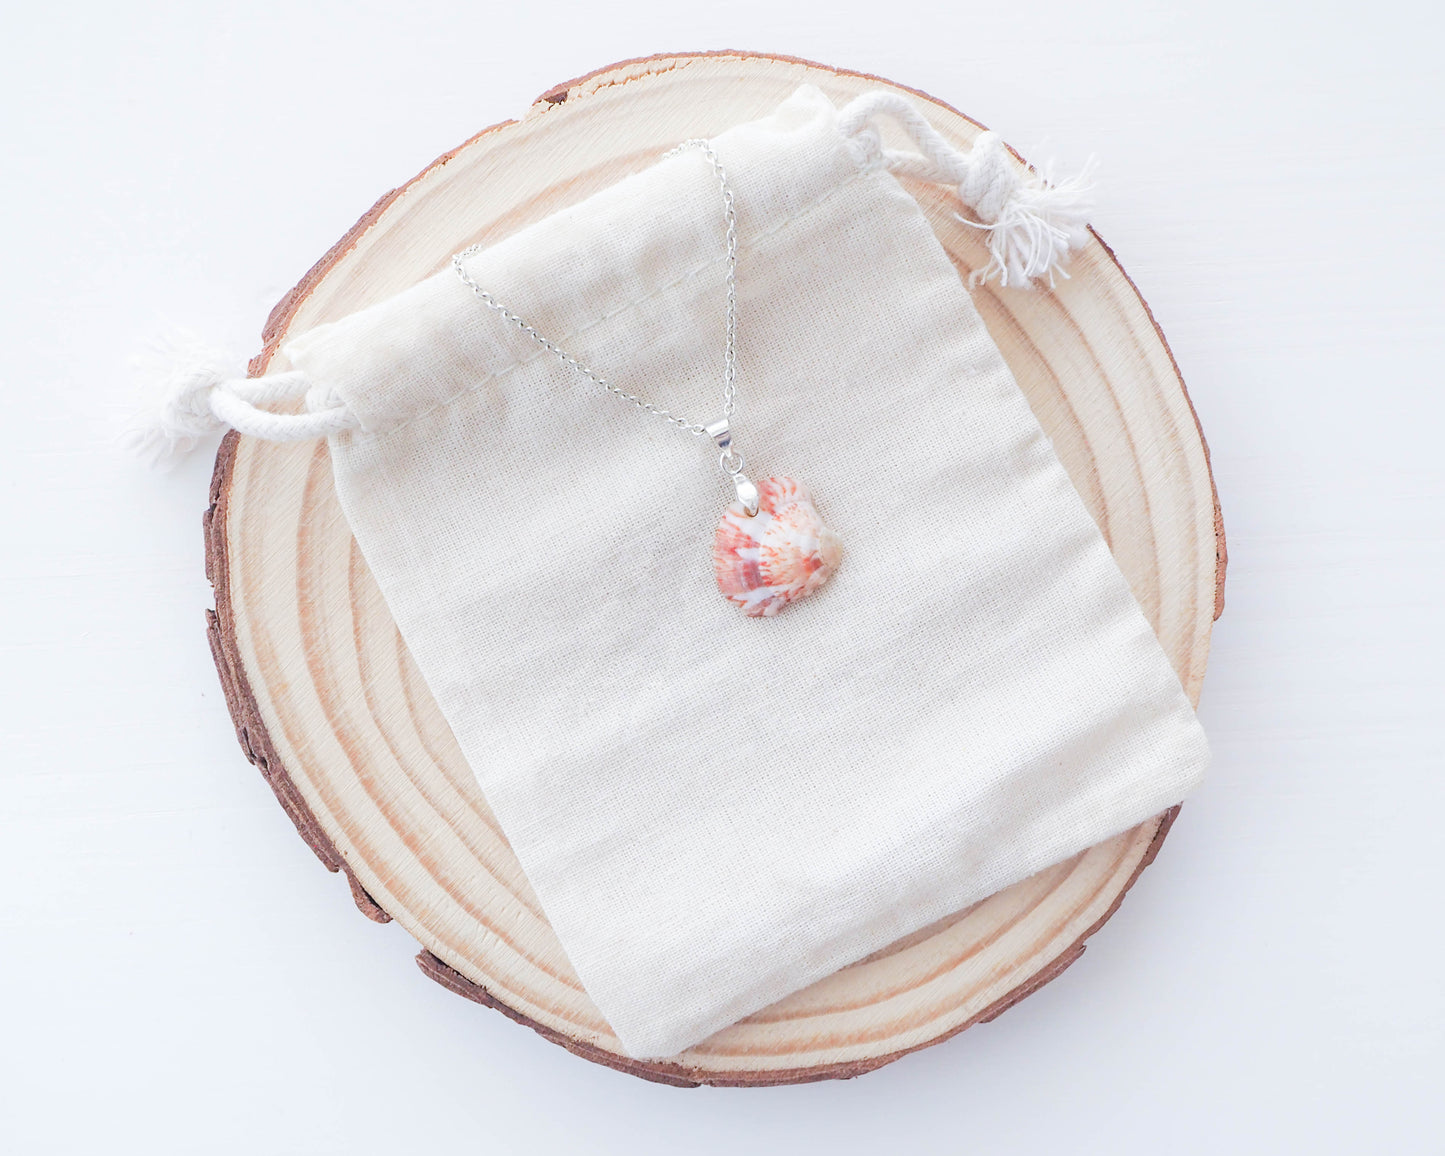 A close-up image of the Pink White Marmer Banded Venus Shell pendant, showcasing its vibrant fuchsia and ivory bands within a silver setting